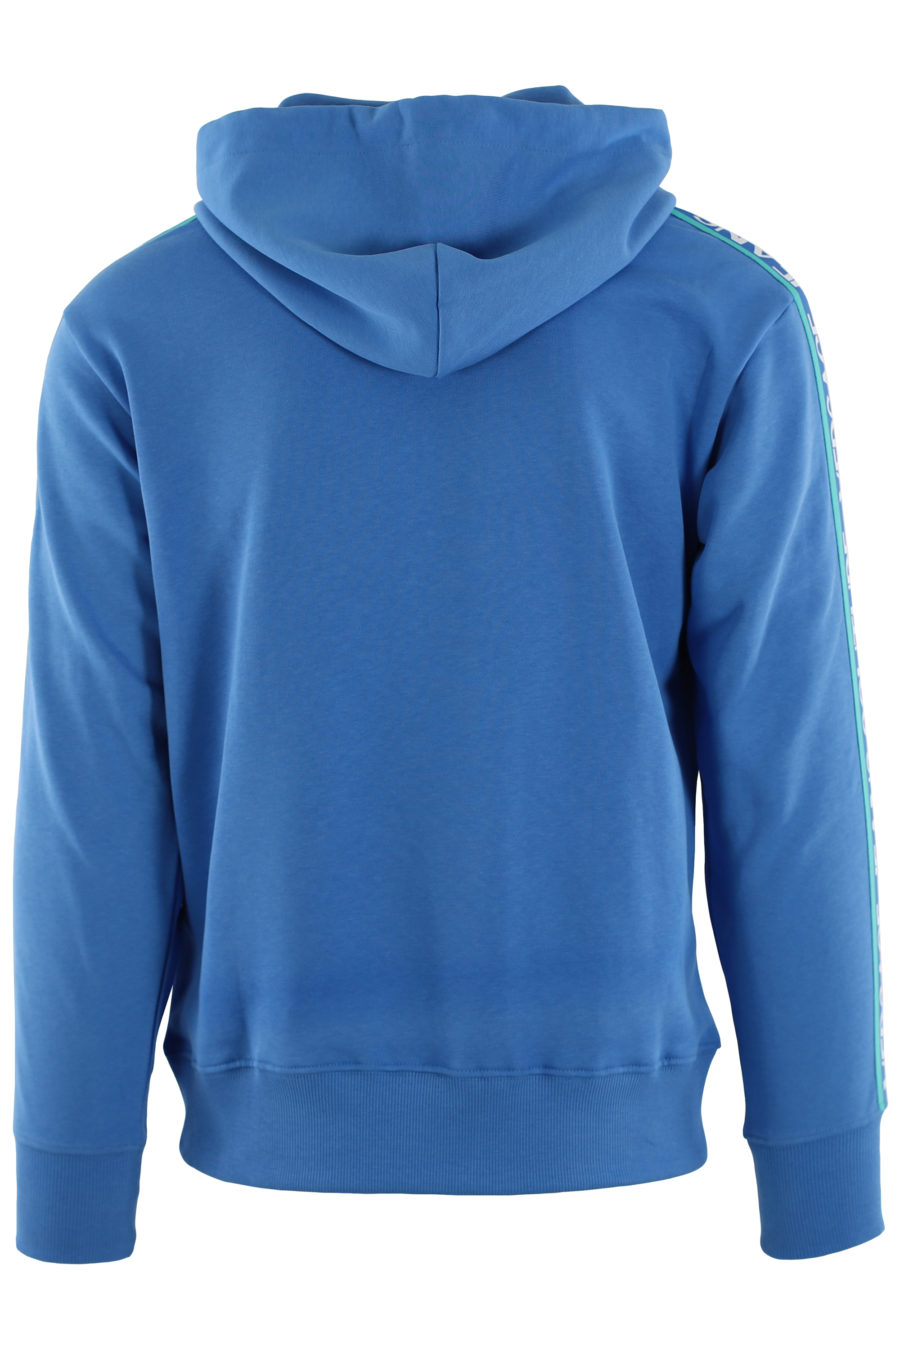 Blue sweatshirt with hood and blue ribbon with logo - IMG 0453